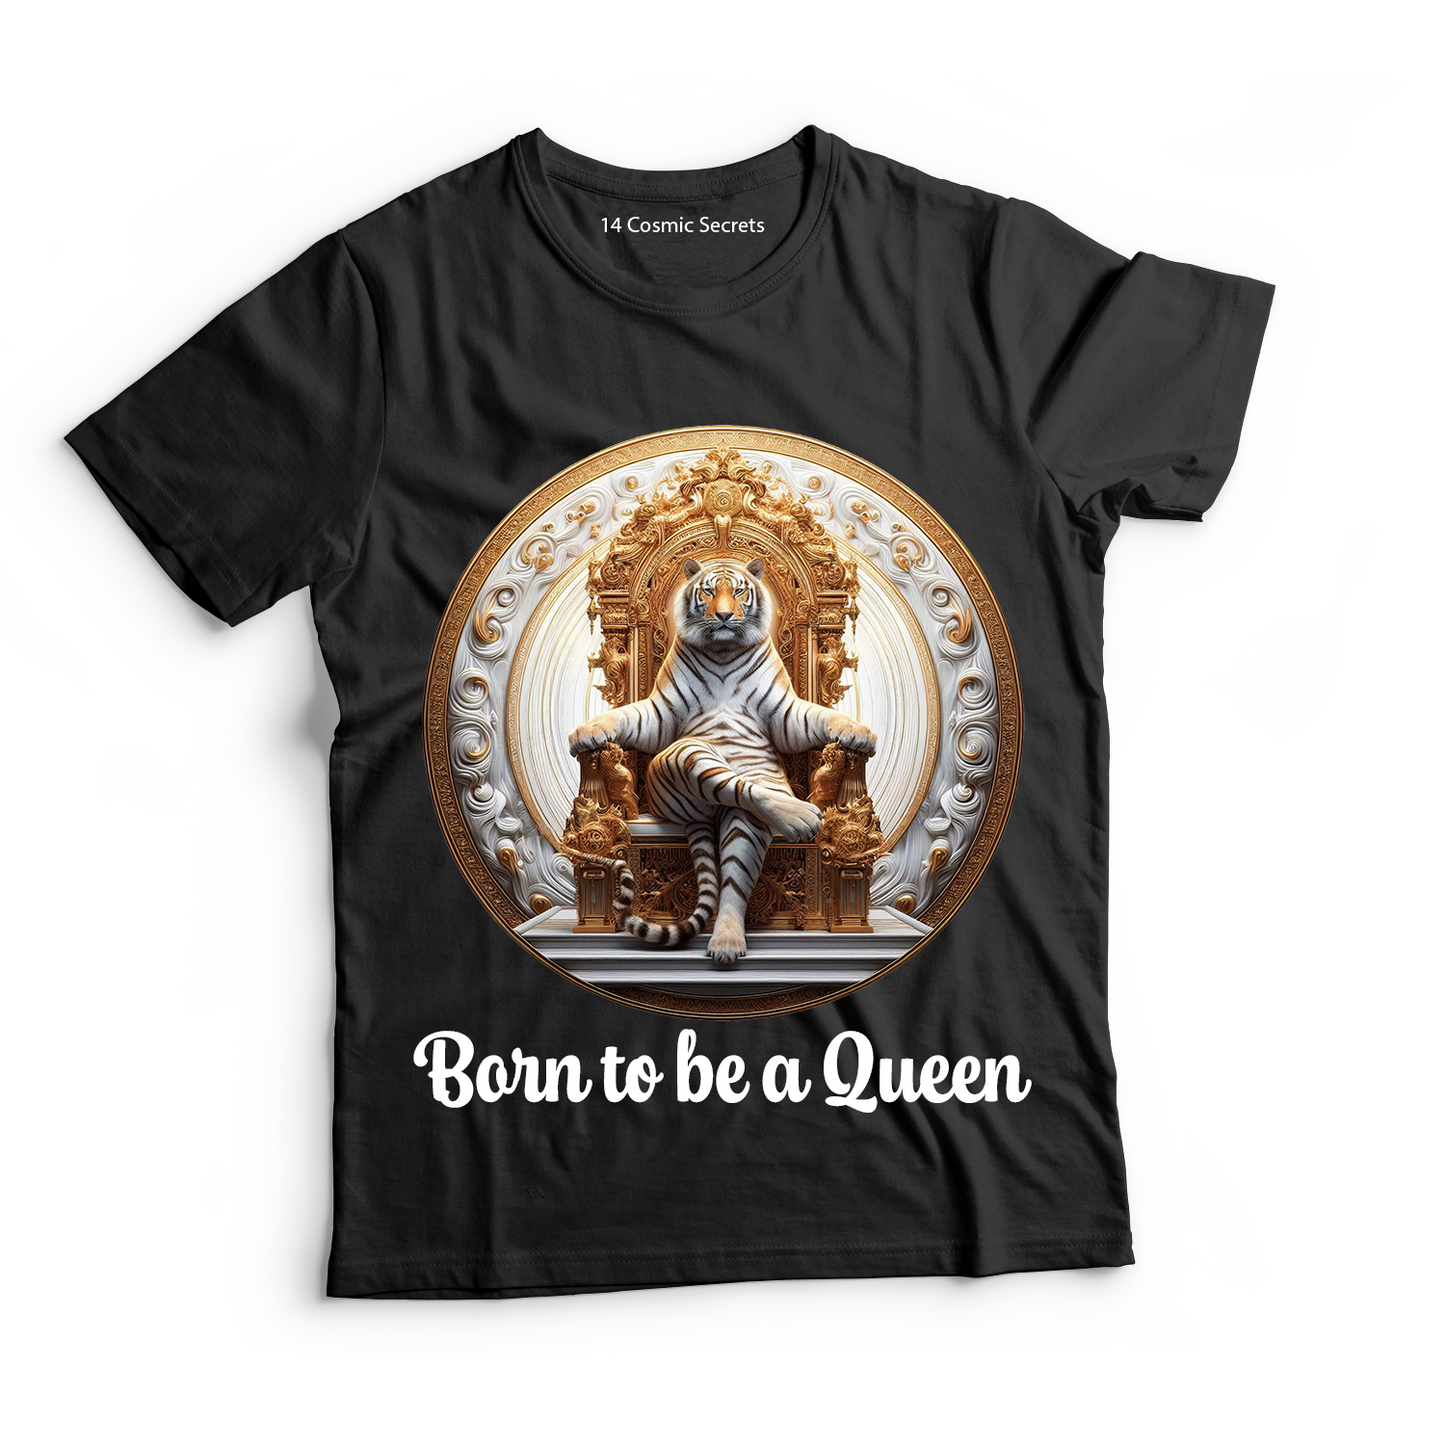 Bengal King of the Jungle Graphic Printed T-Shirt  Cotton T-Shirt Magnificence of India T-Shirt